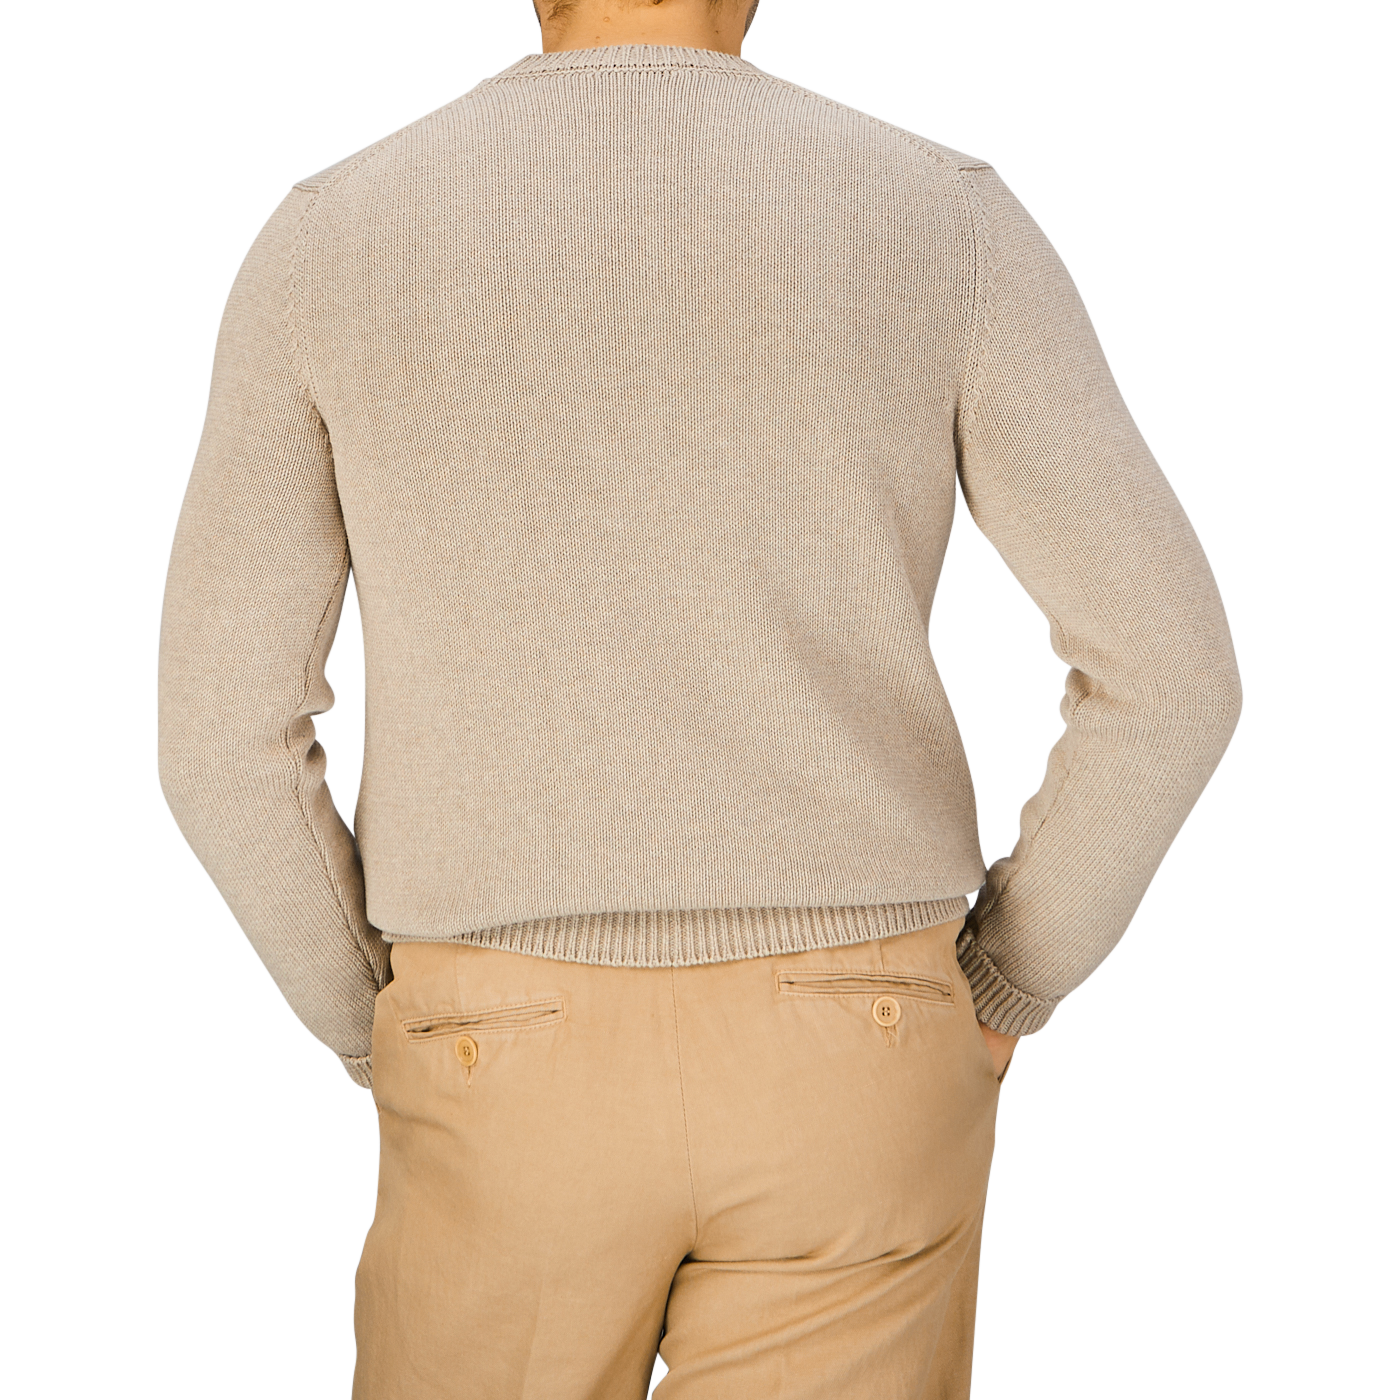 The back view of a man wearing tan pants and a Zanone Taupe Beige Cotton Crew Neck Sweater.